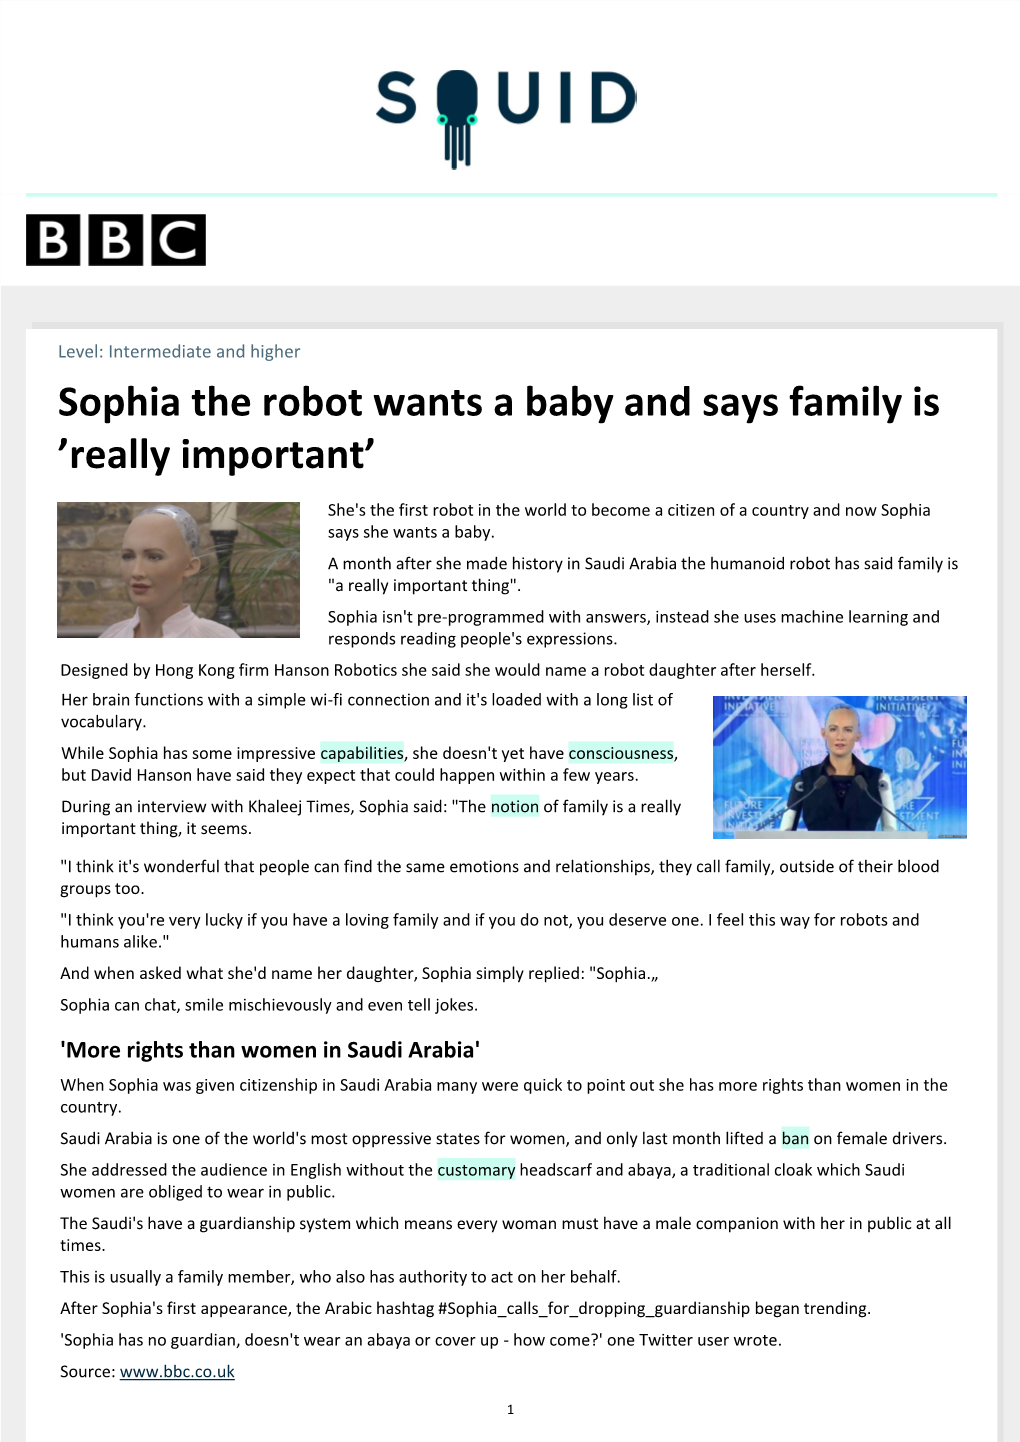 Sophia the Robot Wants a Baby and Says Family Is ’Really Important’